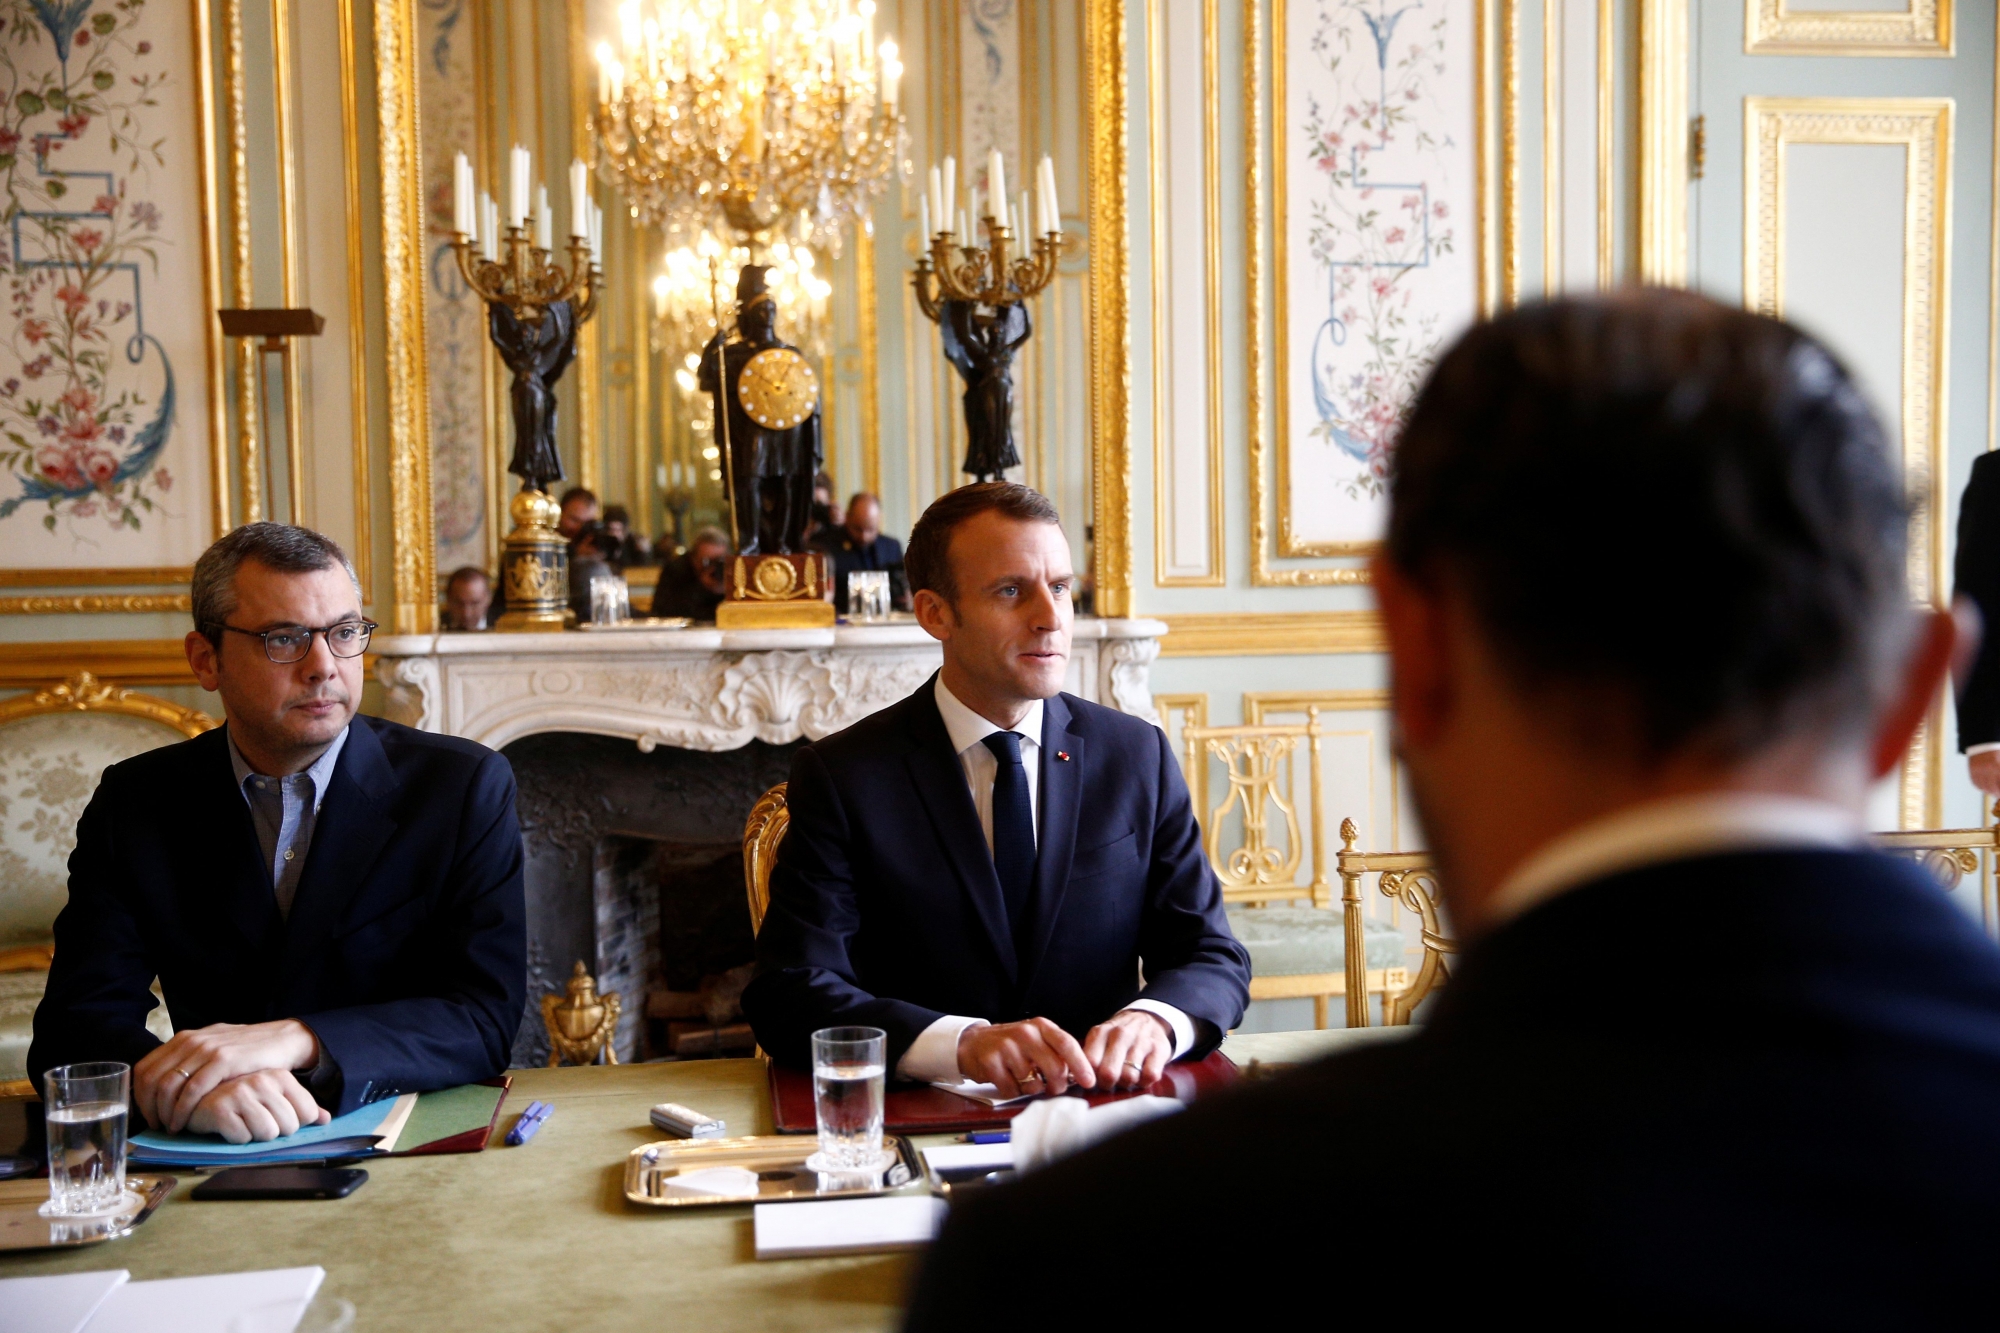 epa07203378 French President Emmanuel Macron (C) sits across from Prime Minister Edouard Philippe (R) and next to Chief of staff of French president Alexis Kohler (L) at the start of a meeting at the Elysee Palace the day after clashes between police and yellow vest protesters, in Paris, France, 02 December 2018. The so-called 'gilets jaunes' (yellow vests) are a protest movement, which reportedly has no political affiliation, is protesting across the nation over high fuel prices.  EPA/STEPHANE MAHE / POOL MAXPPP OUT FRANKREICH PROTEST GILETS JAUNES